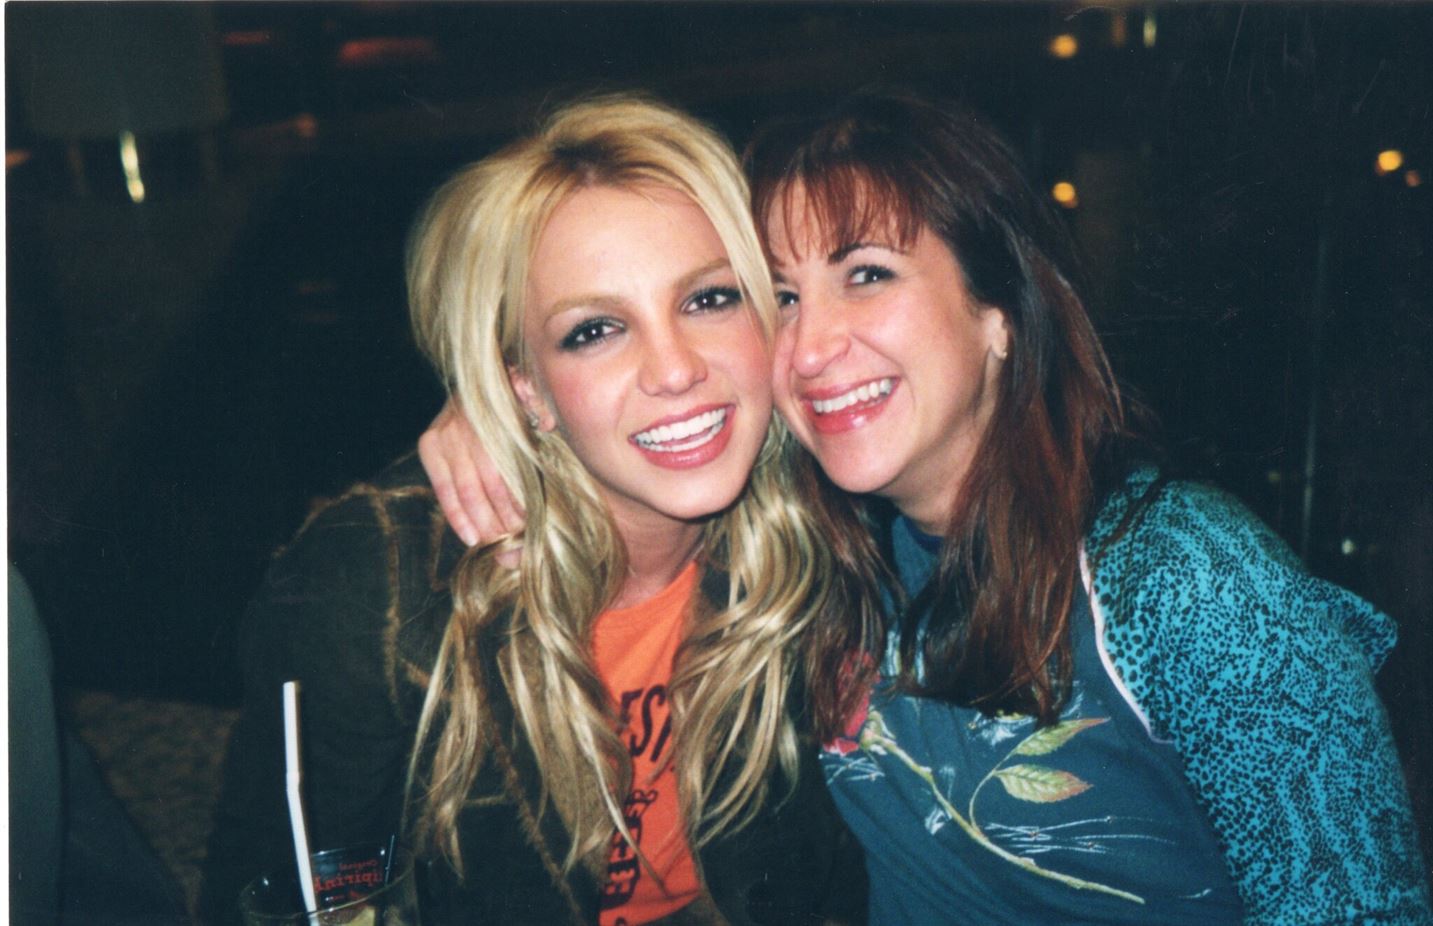 Felicia Culotta was Britney Spears' longtime friend and former assistant. Photo courtesy of Felicia Culotta